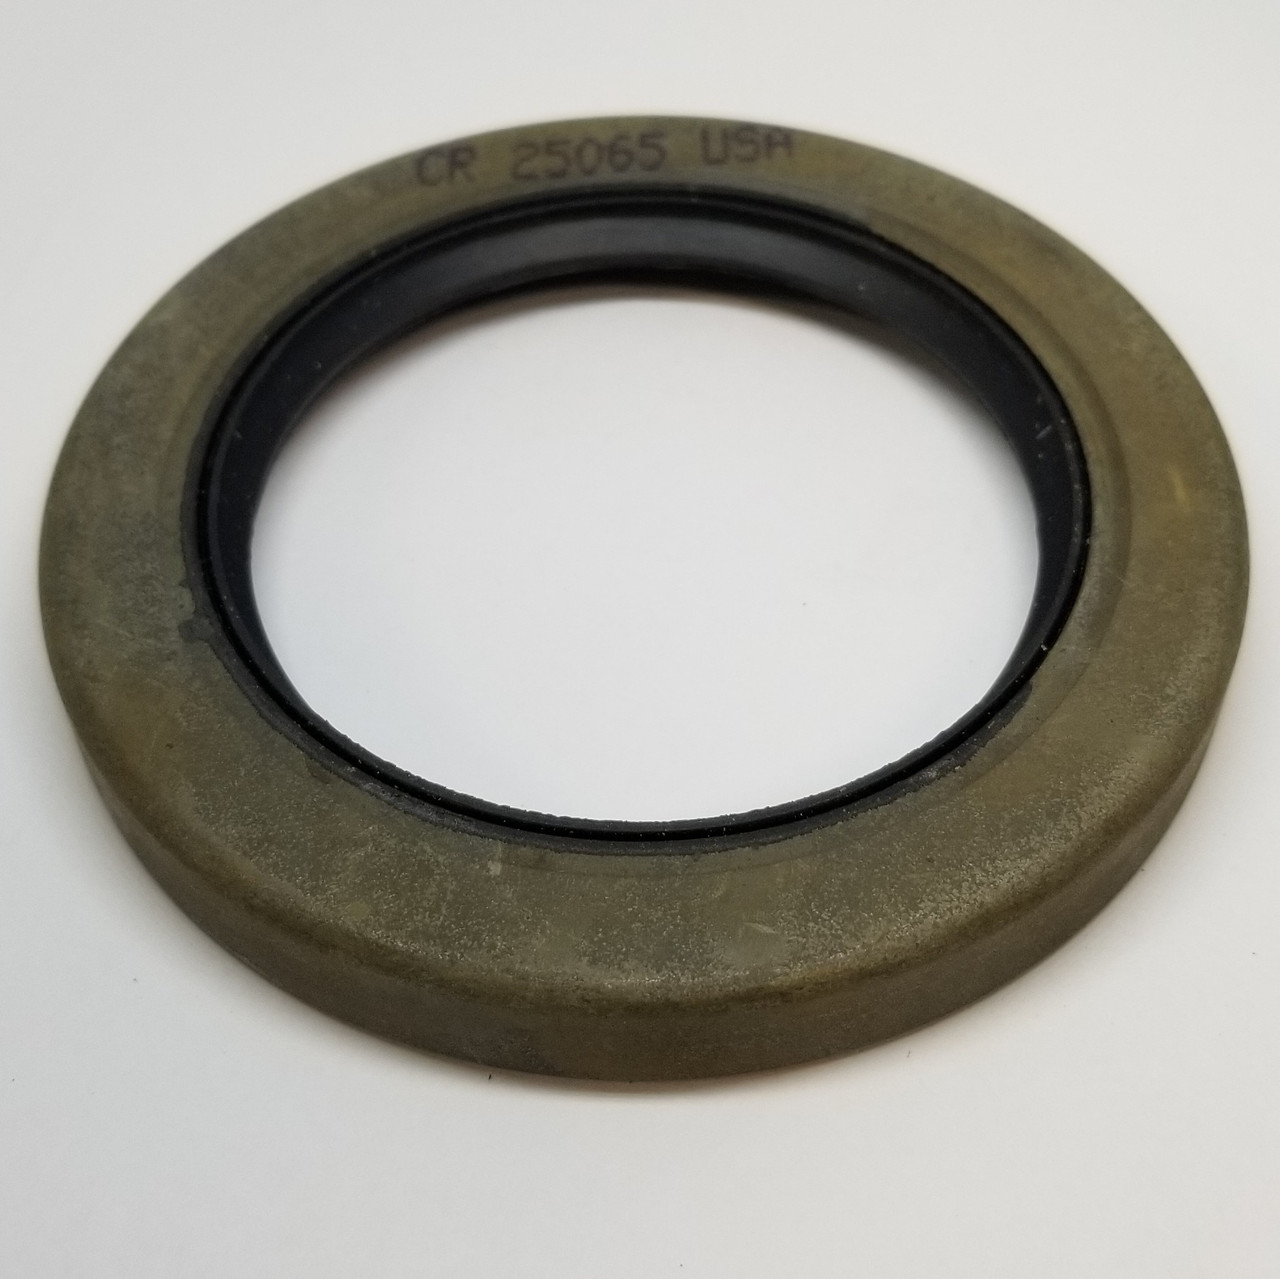 6.125" (155.58mm) Inch Reinforced Metal Double Lip Nitrile Oil Seal  61248 CRSHA1 R